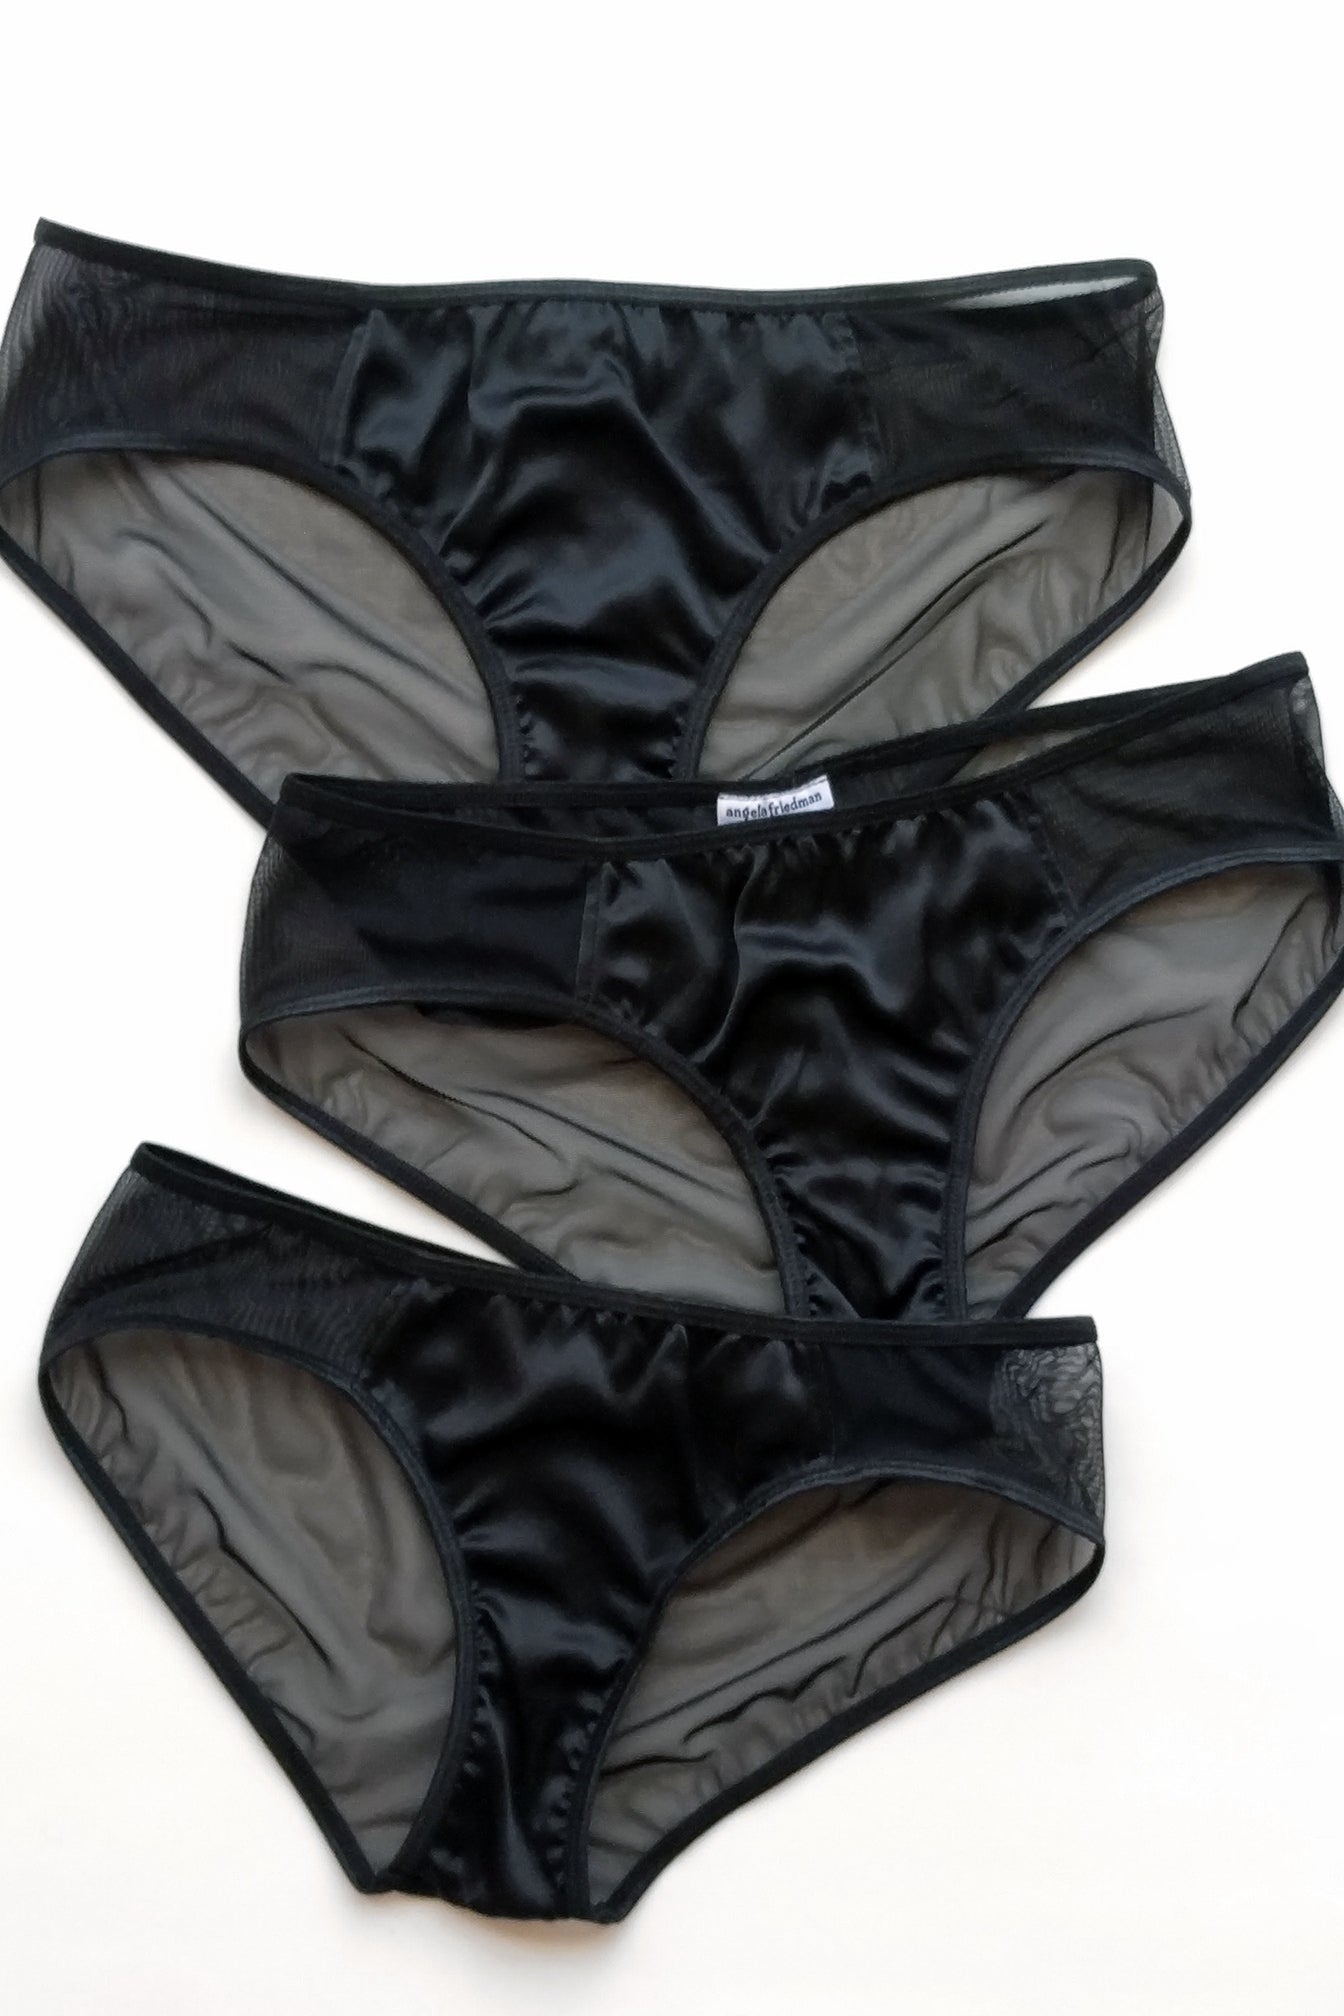 vintage-inspired 100% silk knickers with black mesh